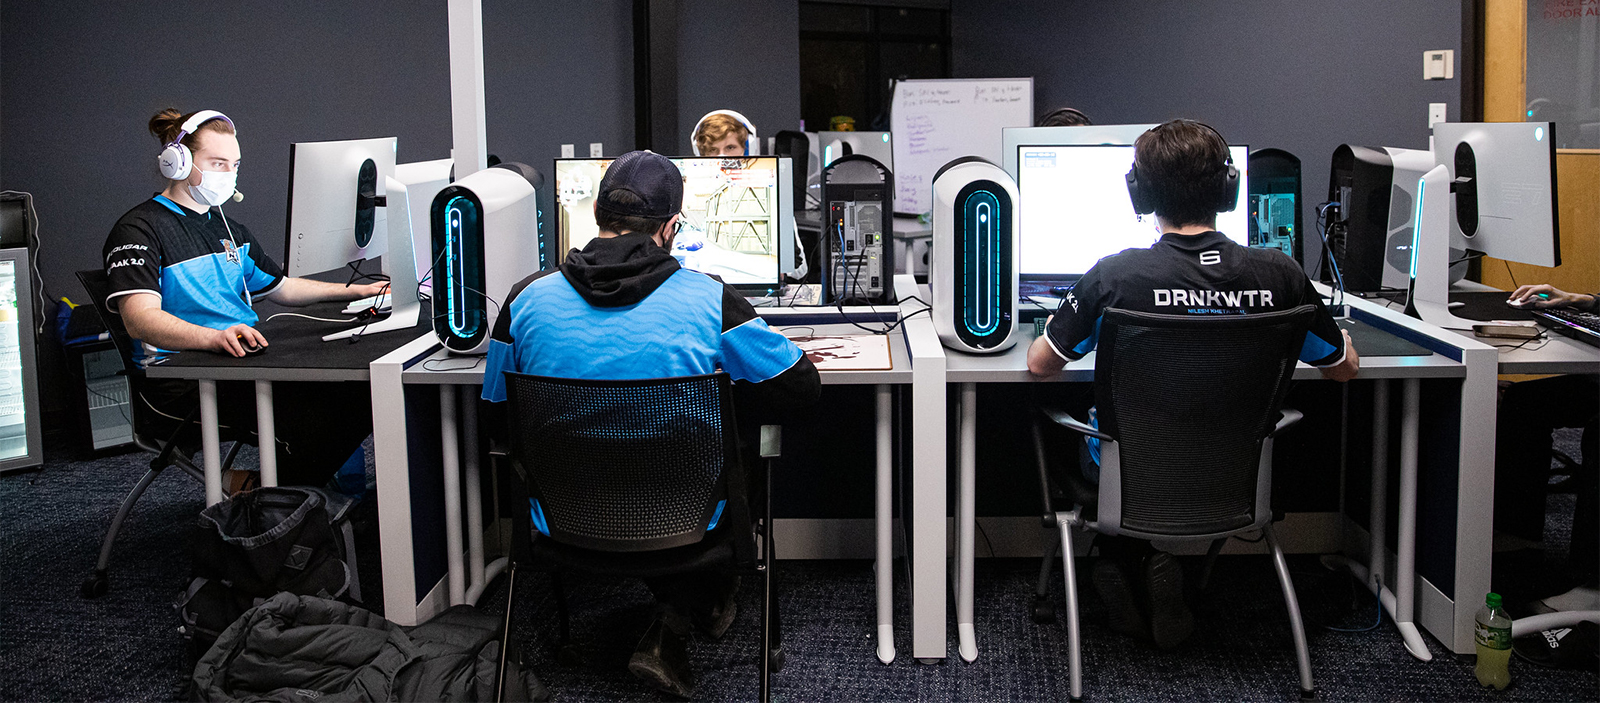 Team of students playing esports in their studio space